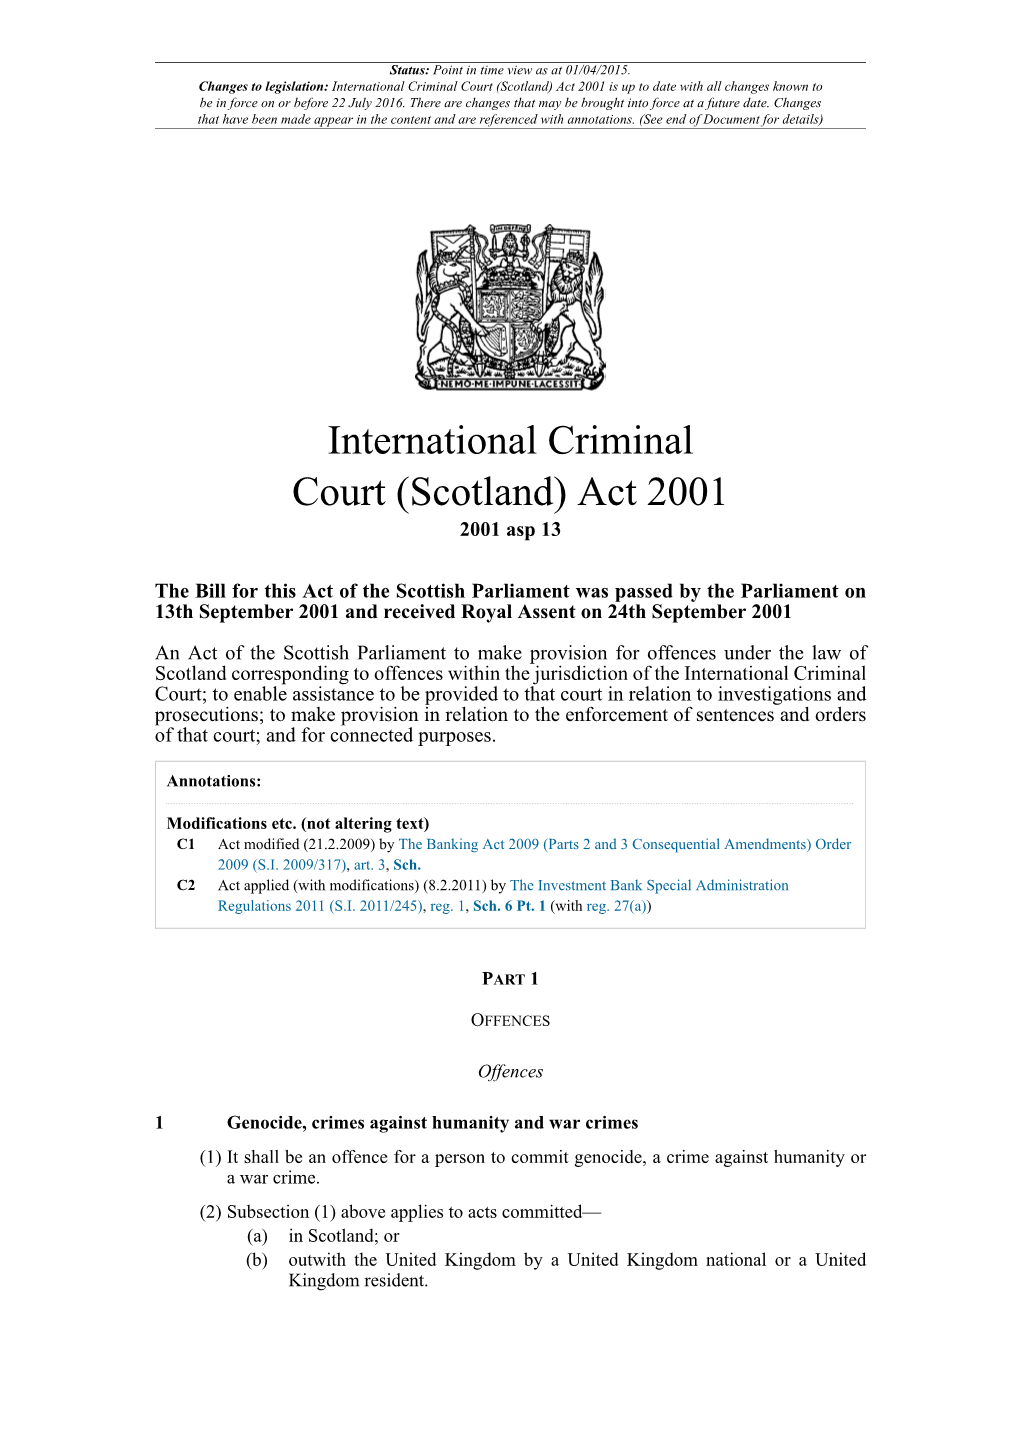 International Criminal Court (Scotland) Act 2001 Is up to Date with All Changes Known to Be in Force on Or Before 22 July 2016